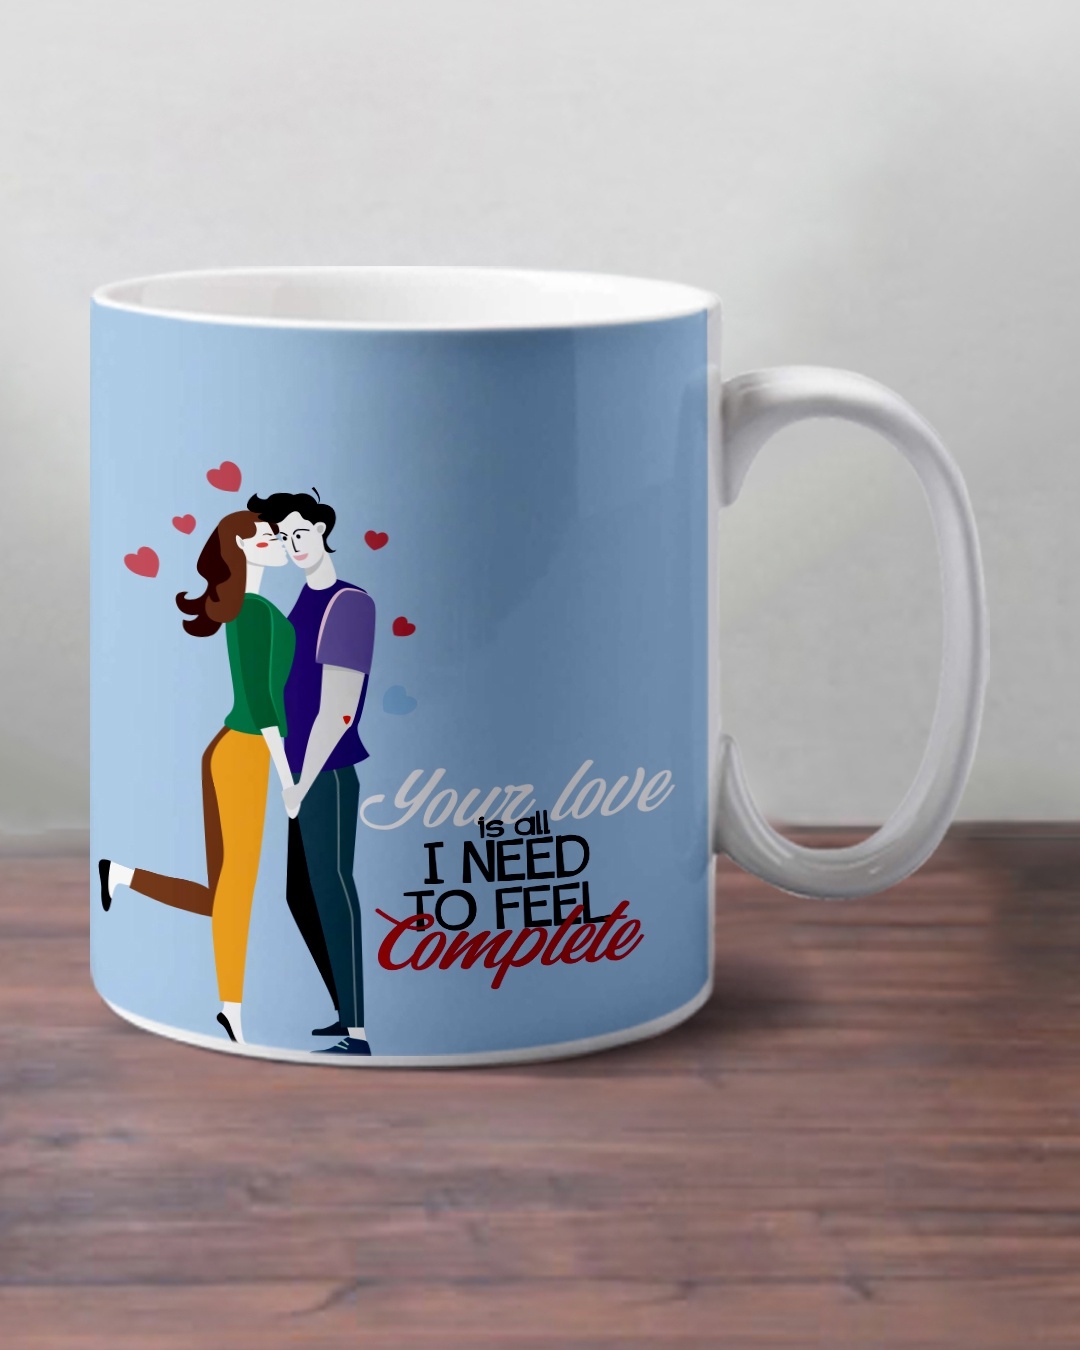 Shop Romantic Your love is Need to Feel Complete Ceramic Mug (350ml, Blue, Single piece)-Design